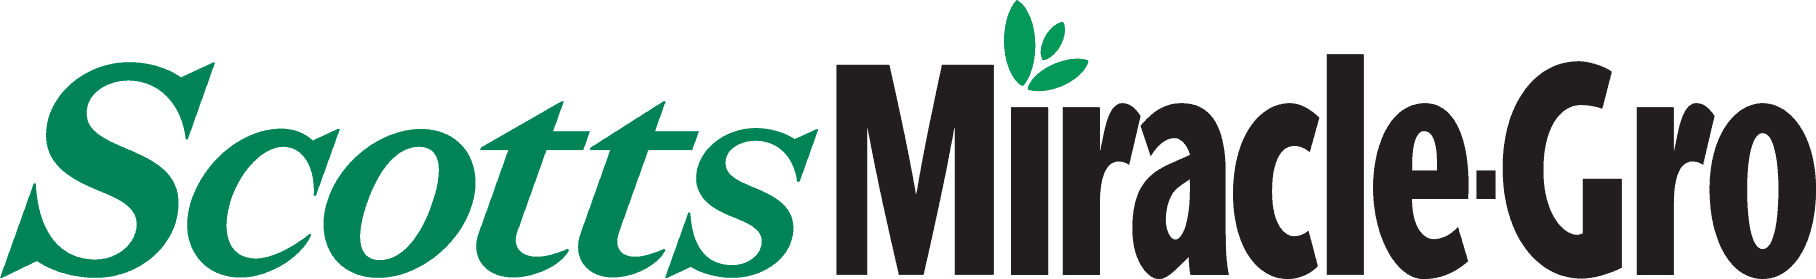 Scotts Miracle Gro Company Class A Shares SMG Dividends